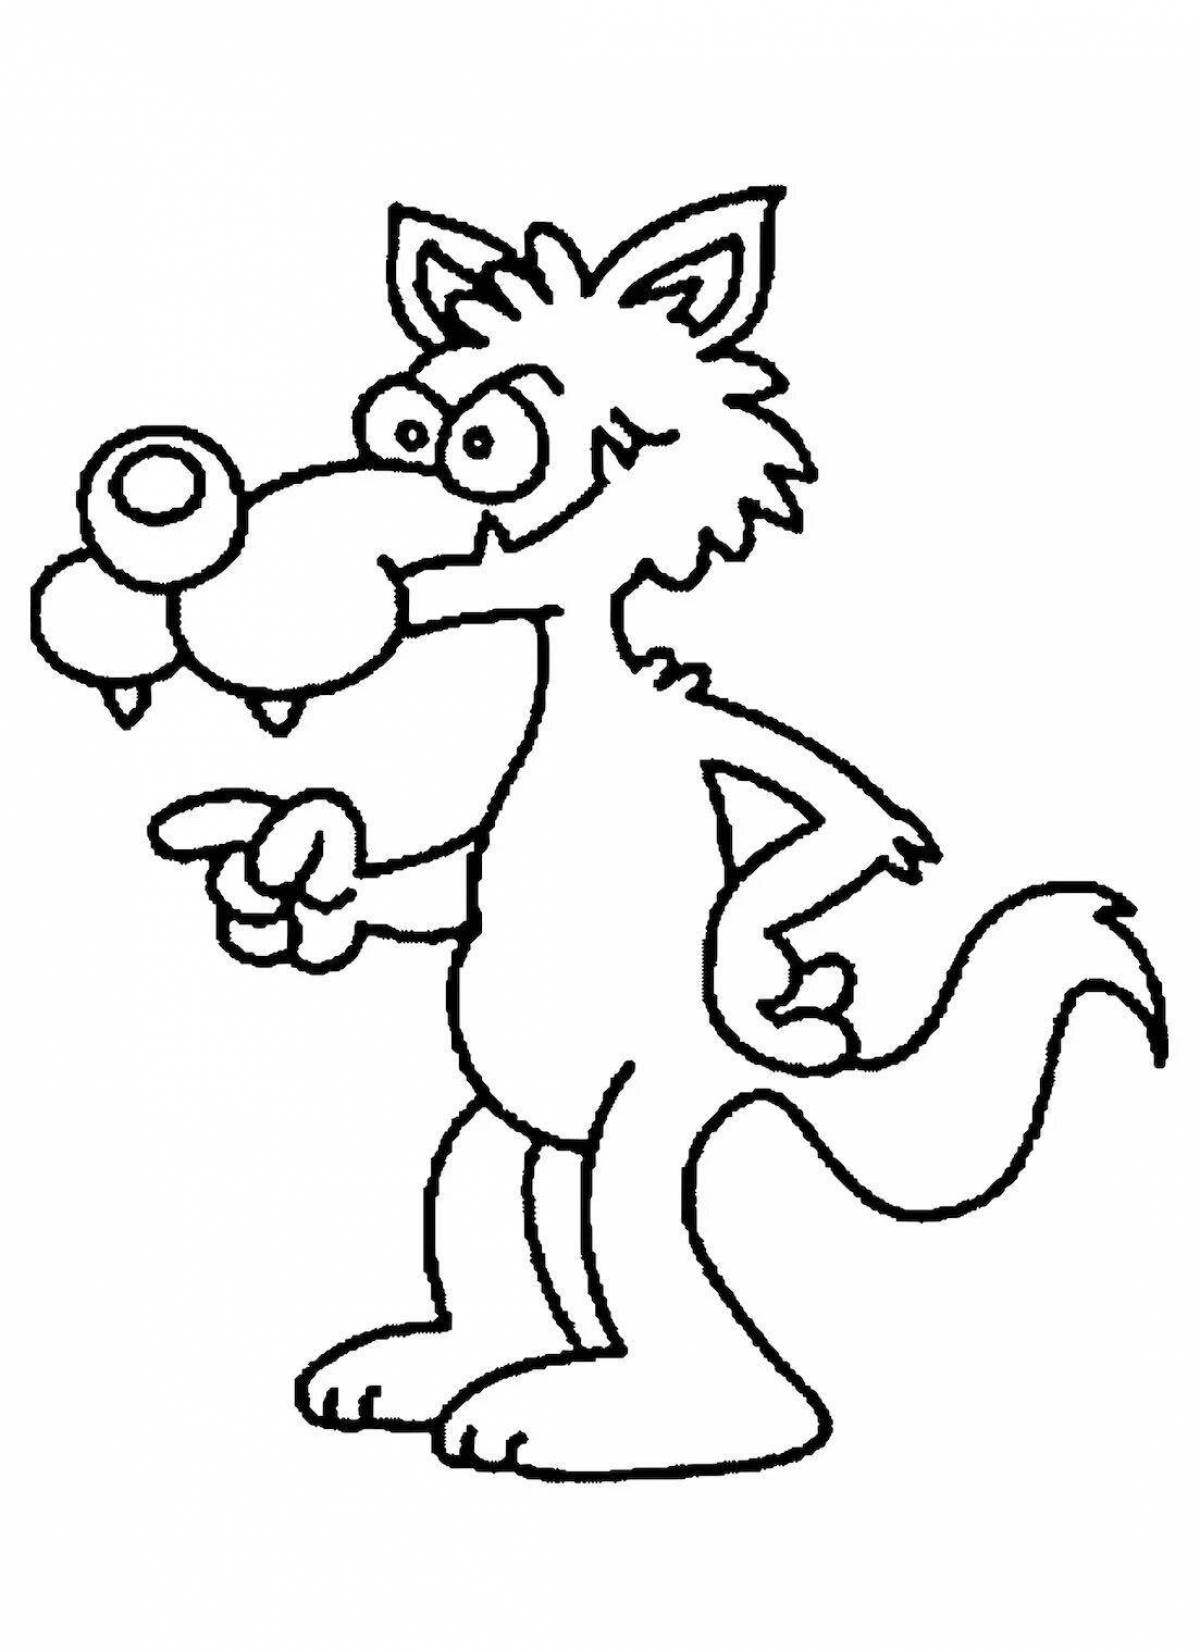 Coloring page graceful cartoon wolf